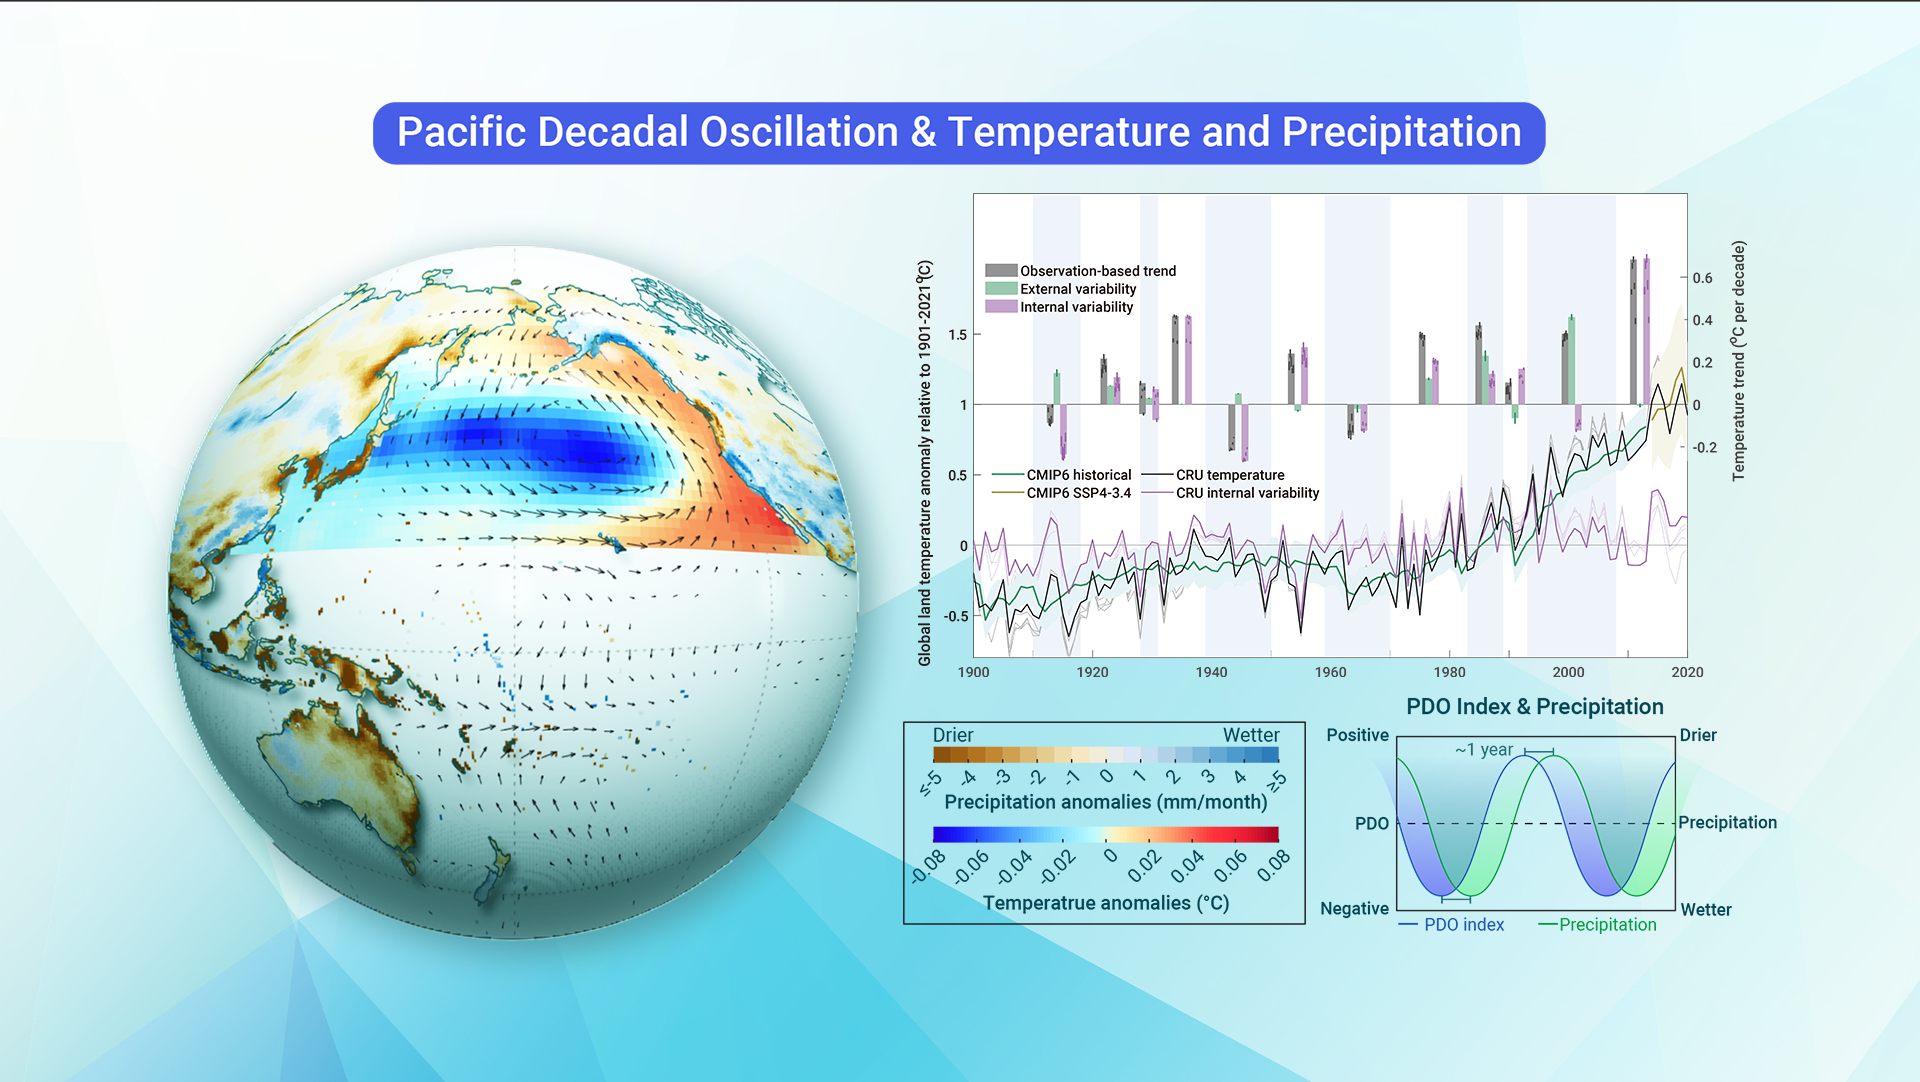 Researchers explore impact of Pacific Decadal Oscillation on global land temperature and precipitation